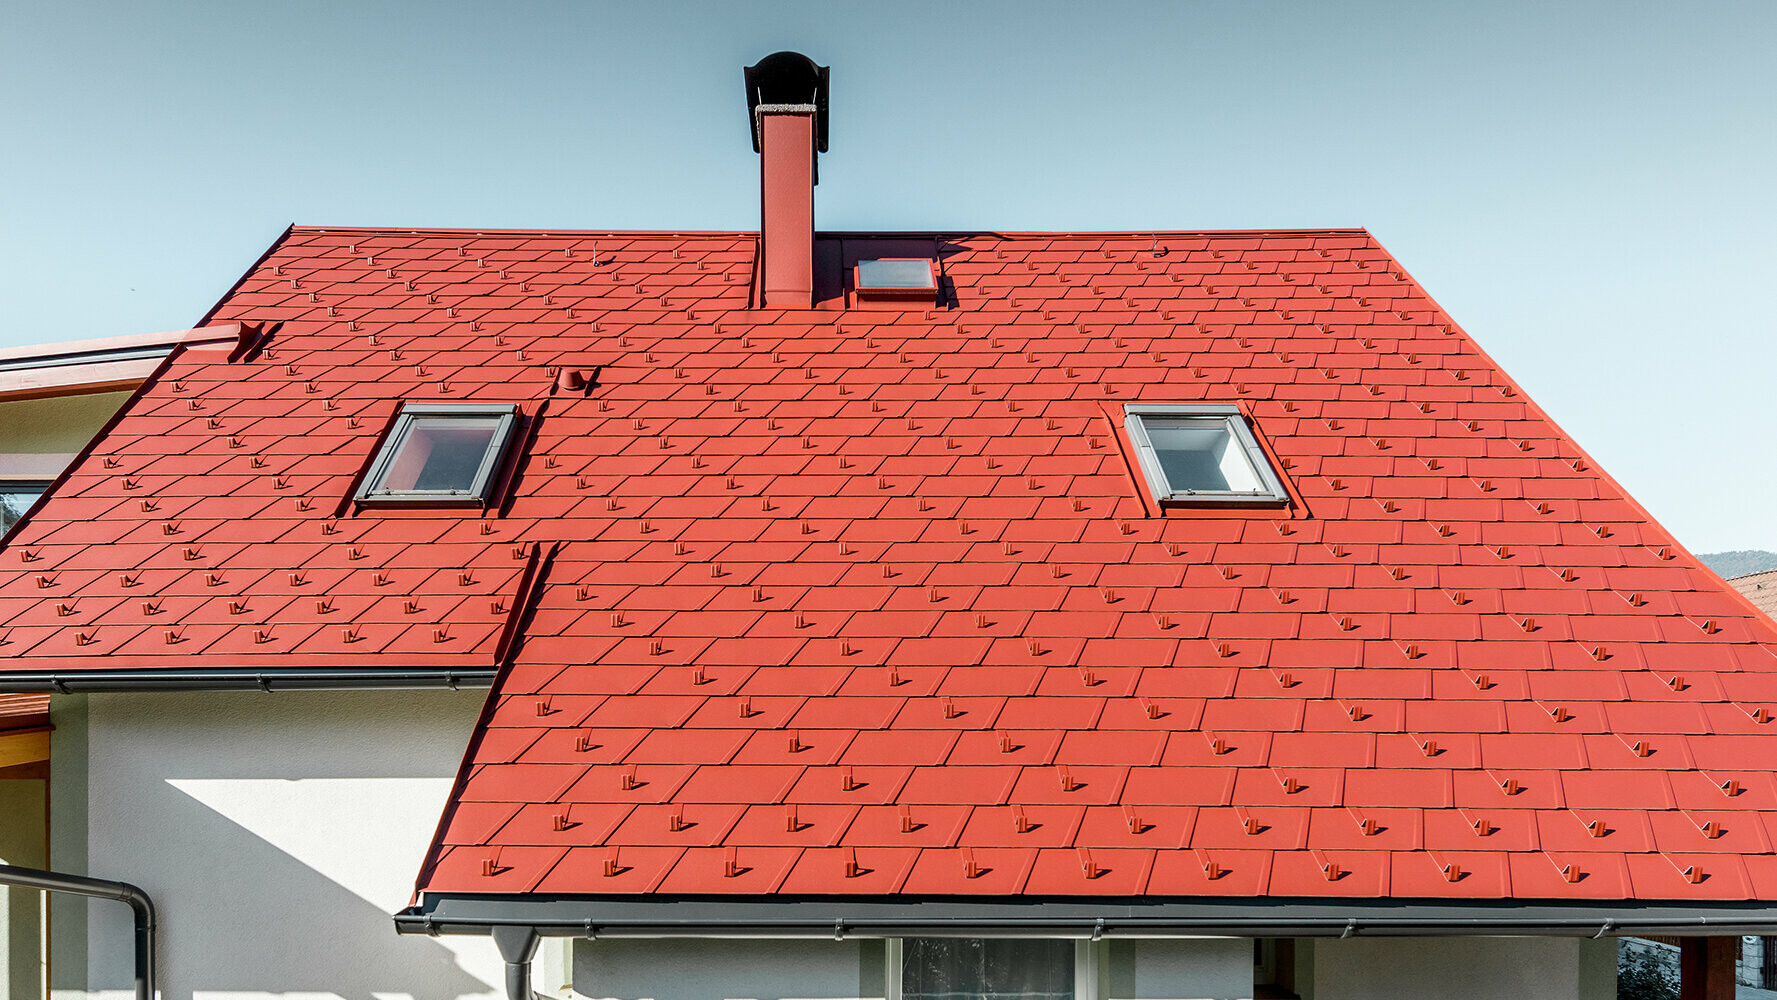 Roof covering with PREFA DS.19 shingles in P.10 oxide red